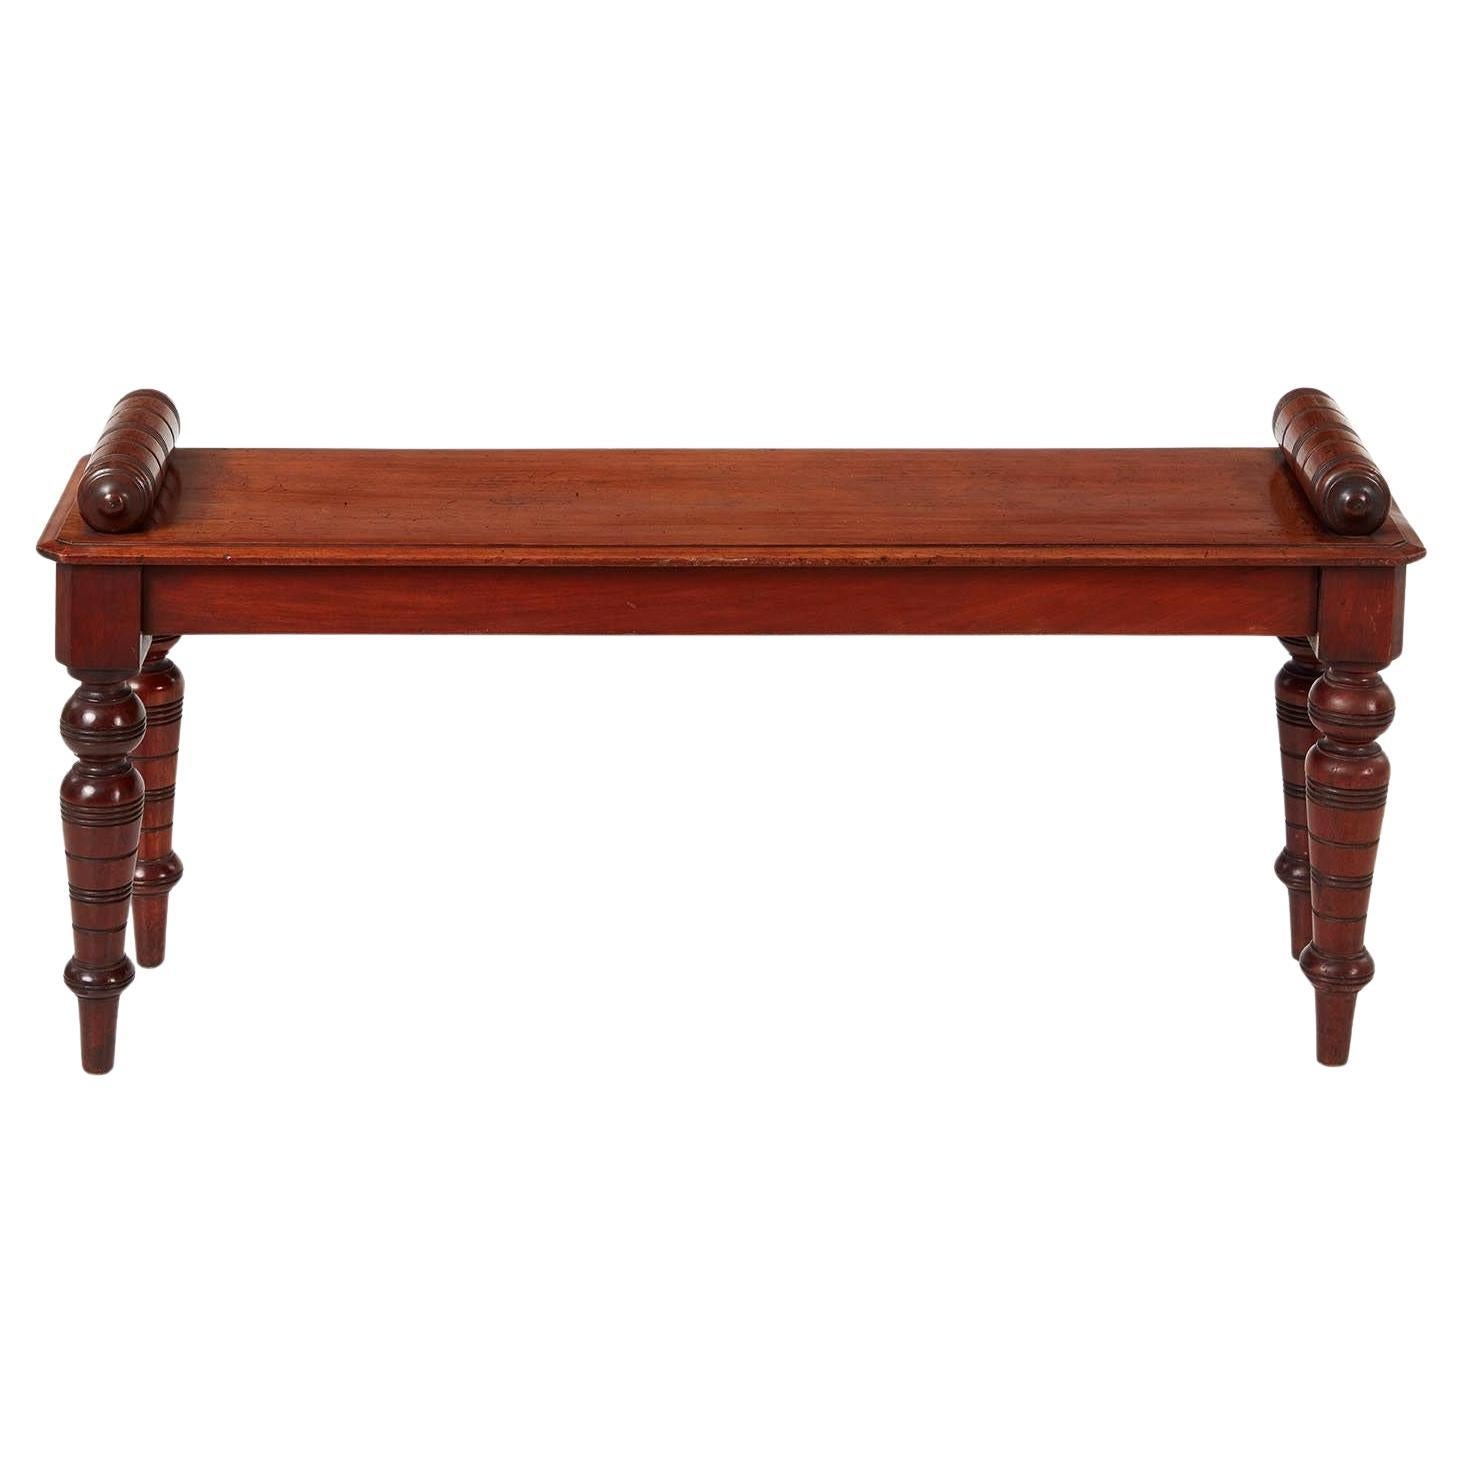 English 19th c. Hall Bench For Sale